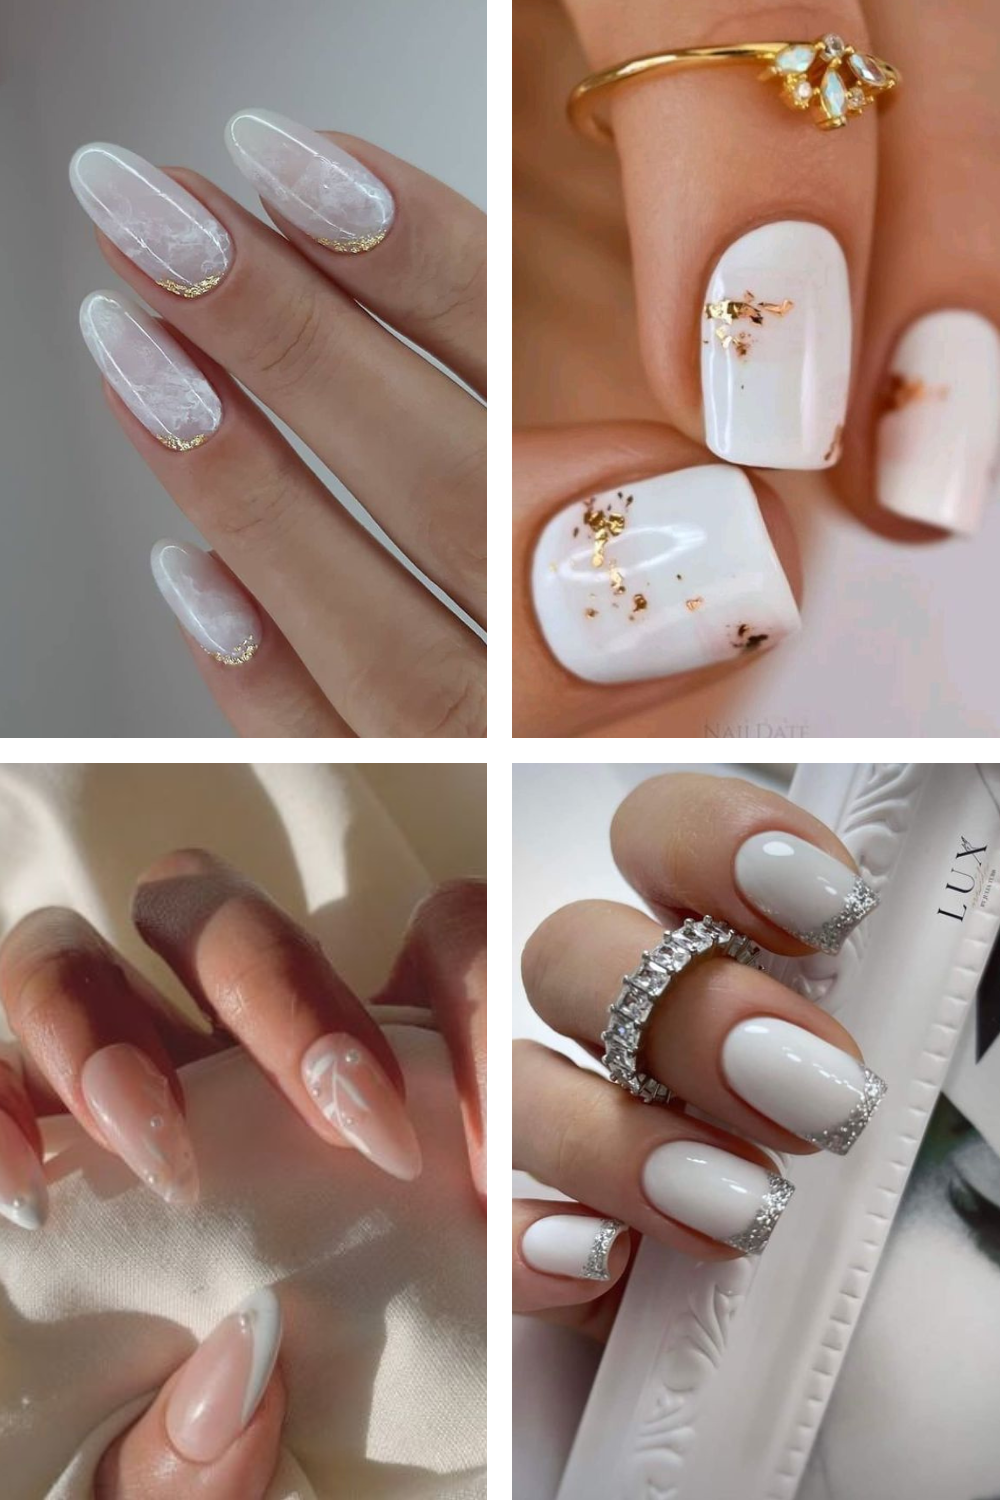 27 Breathtaking Wedding Nail Designs for The Bride-to-Be